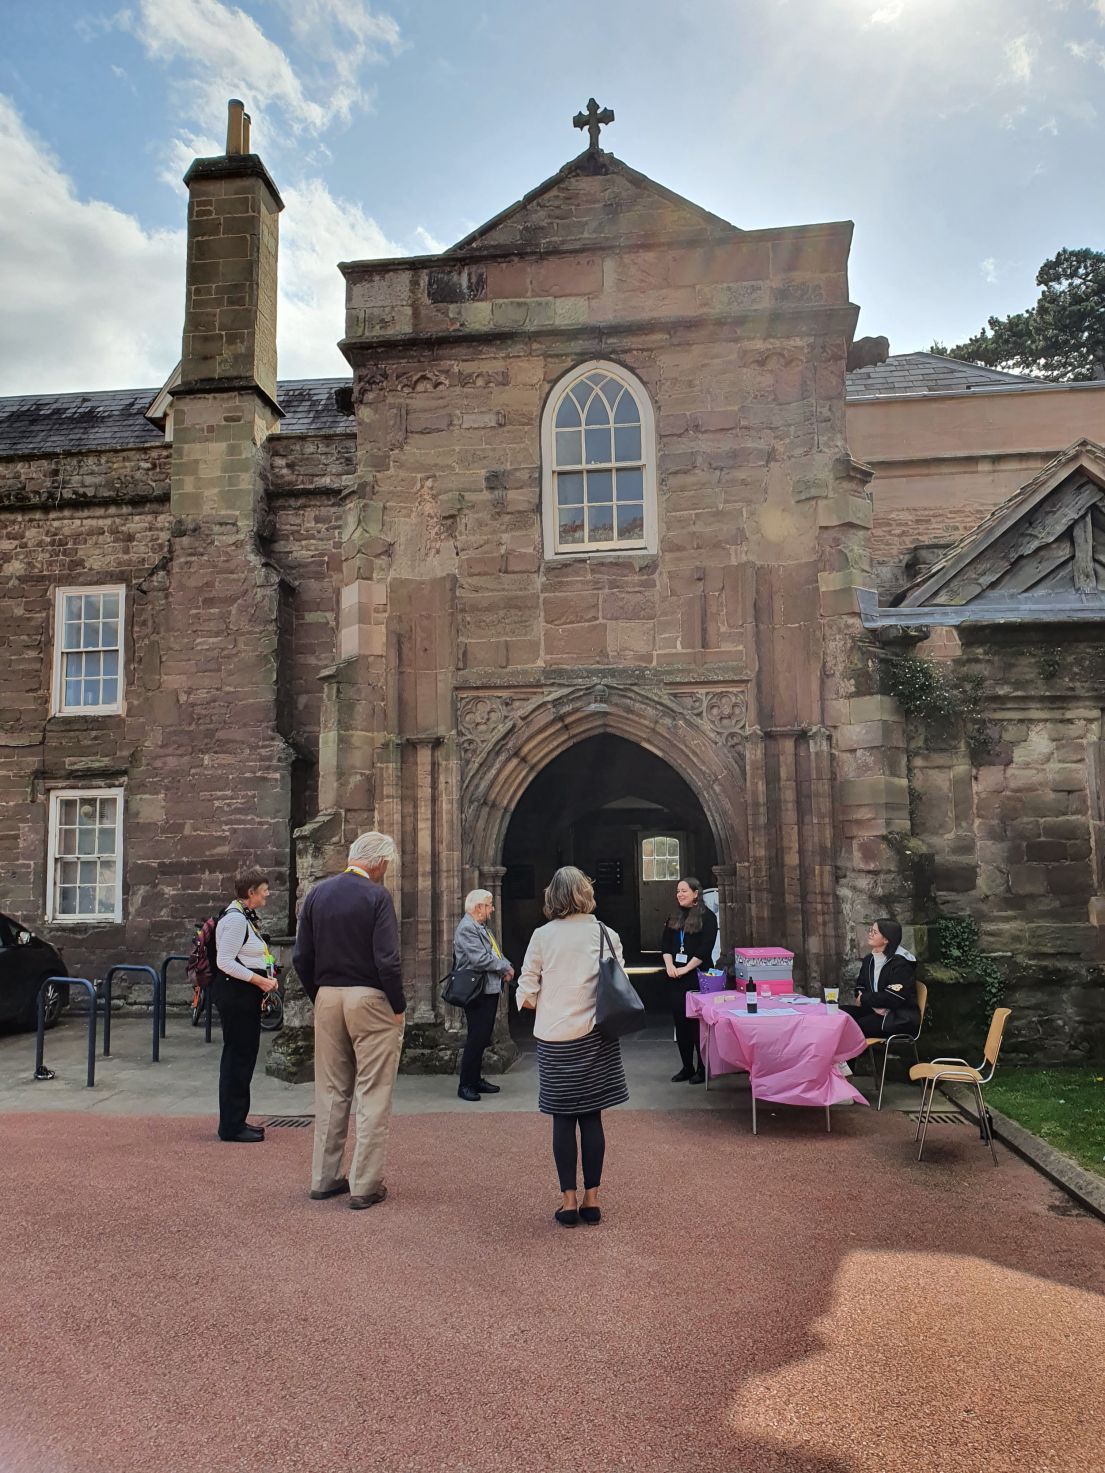 People walking up to an archway in a building, a table with pink table cloth is on the outside.